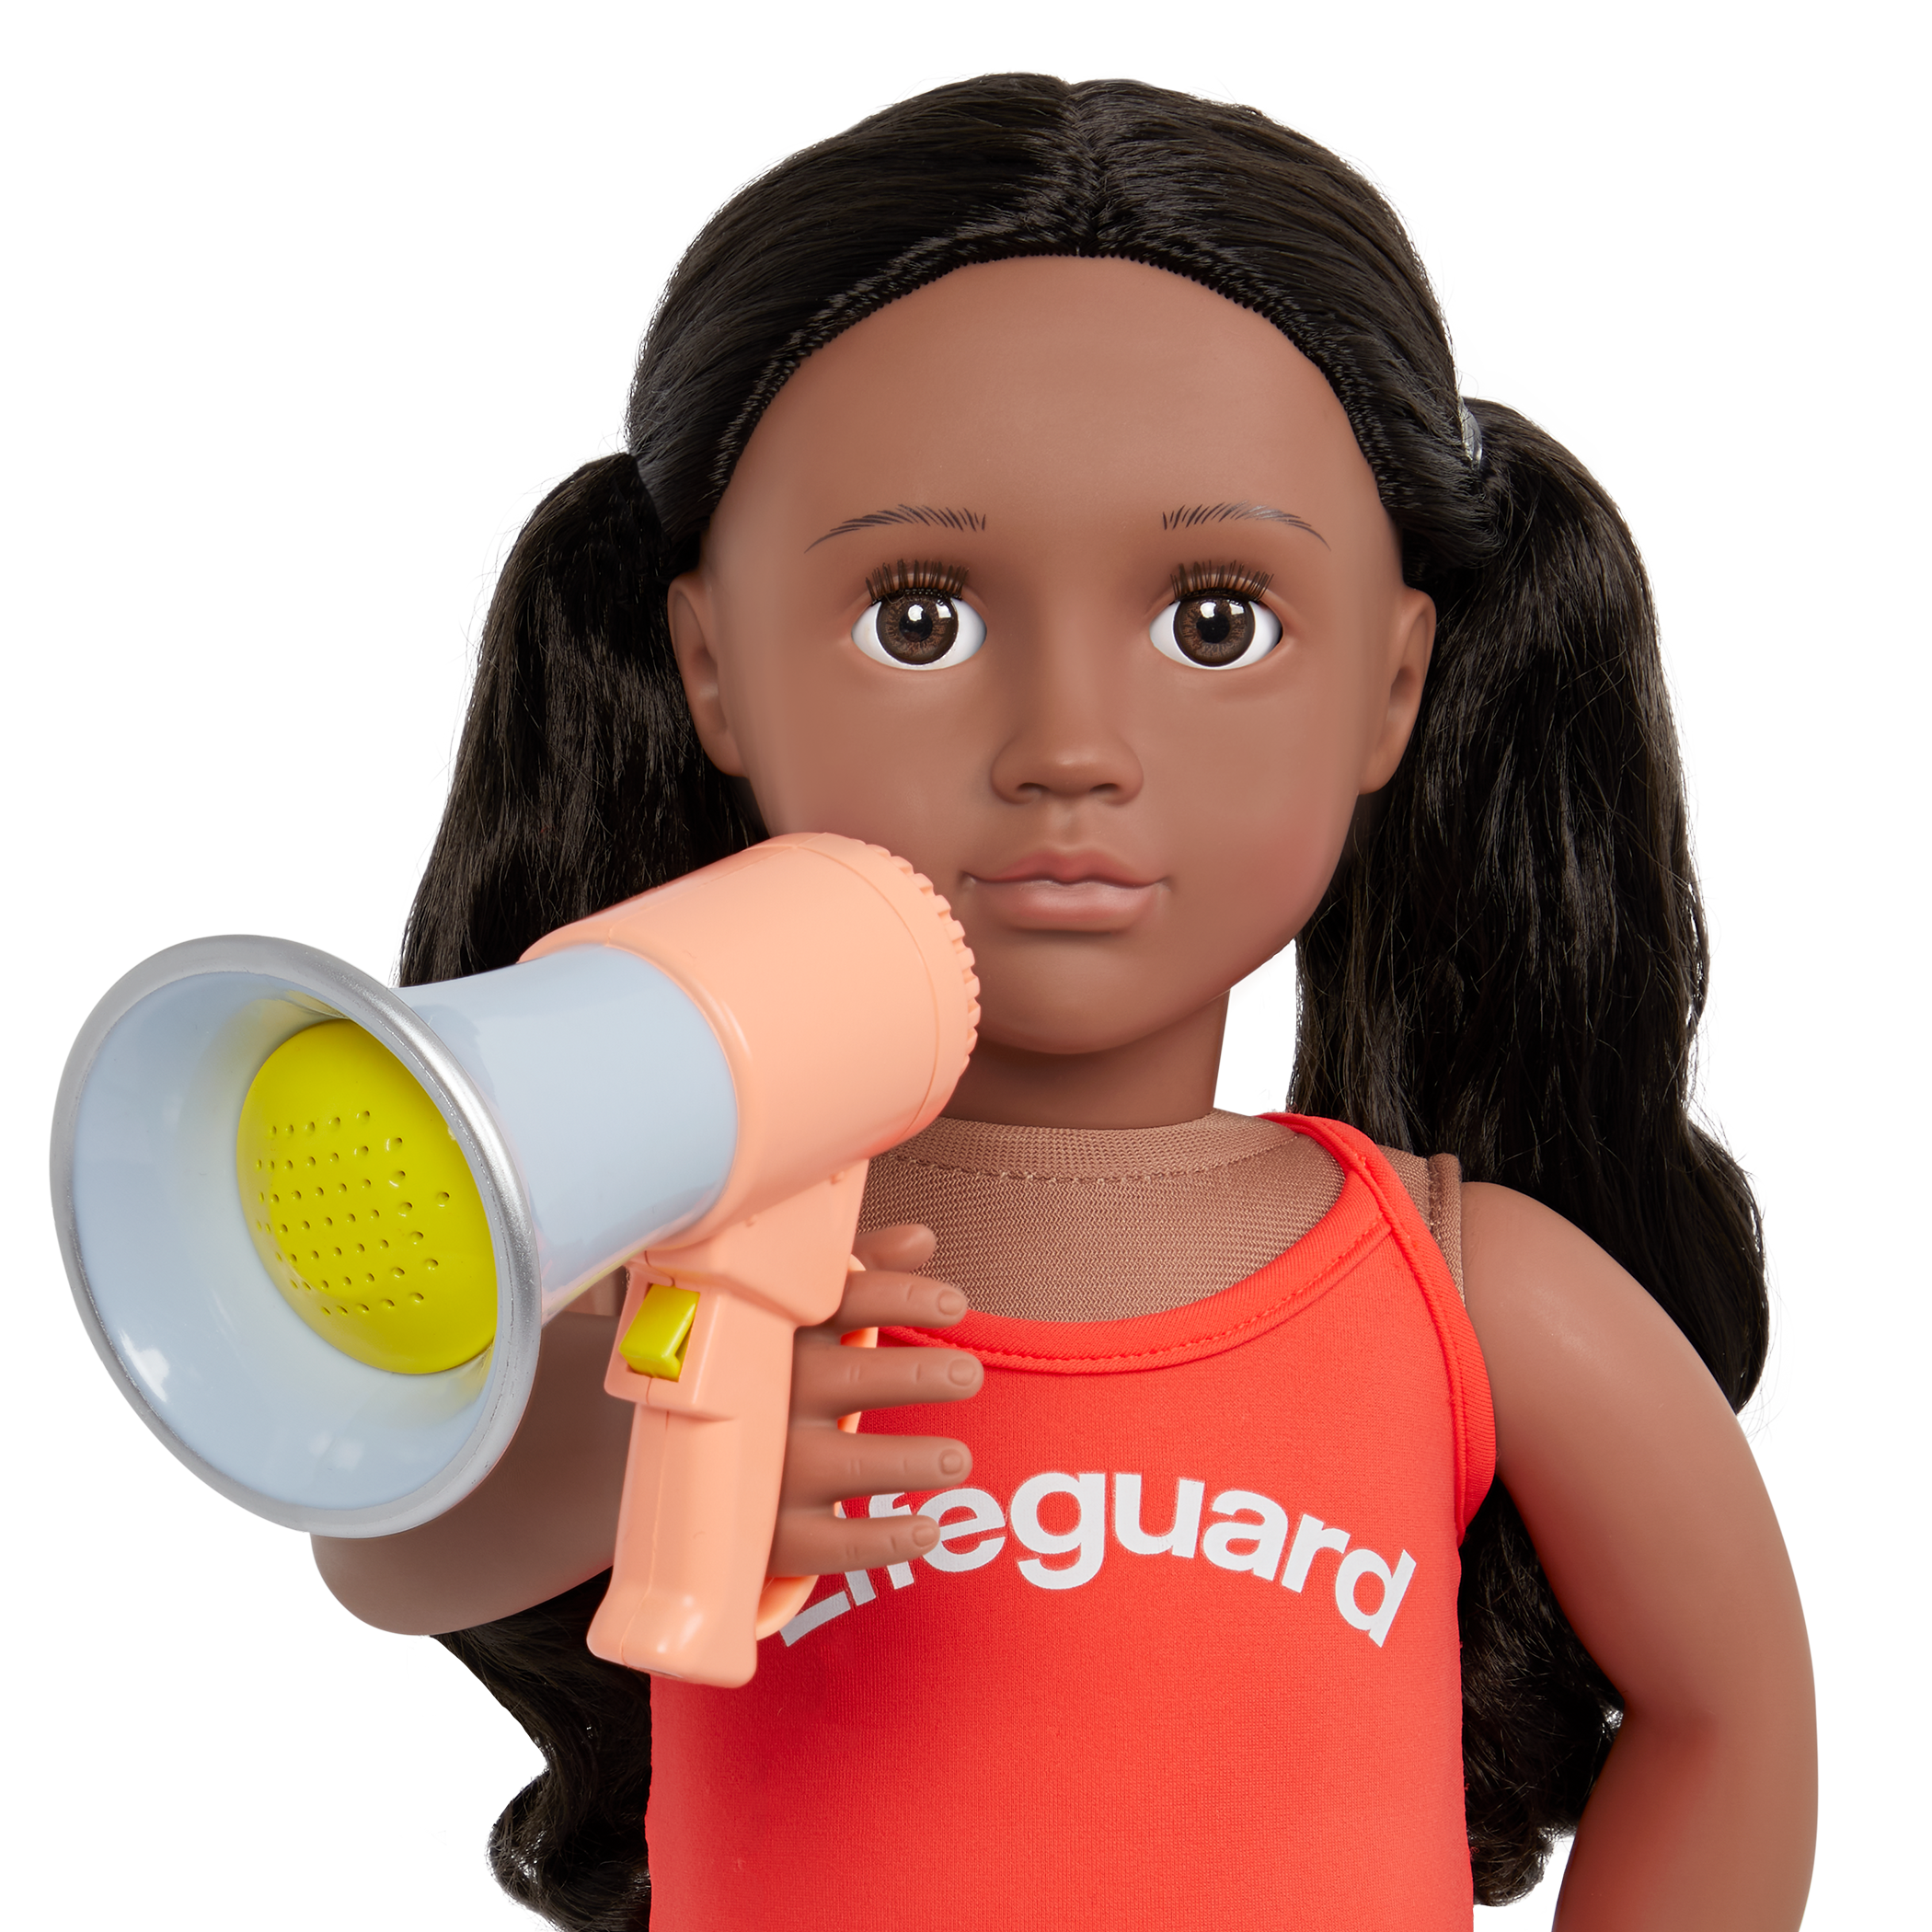 Lifeguard Playset Functional Megaphone for 18-inch Dolls